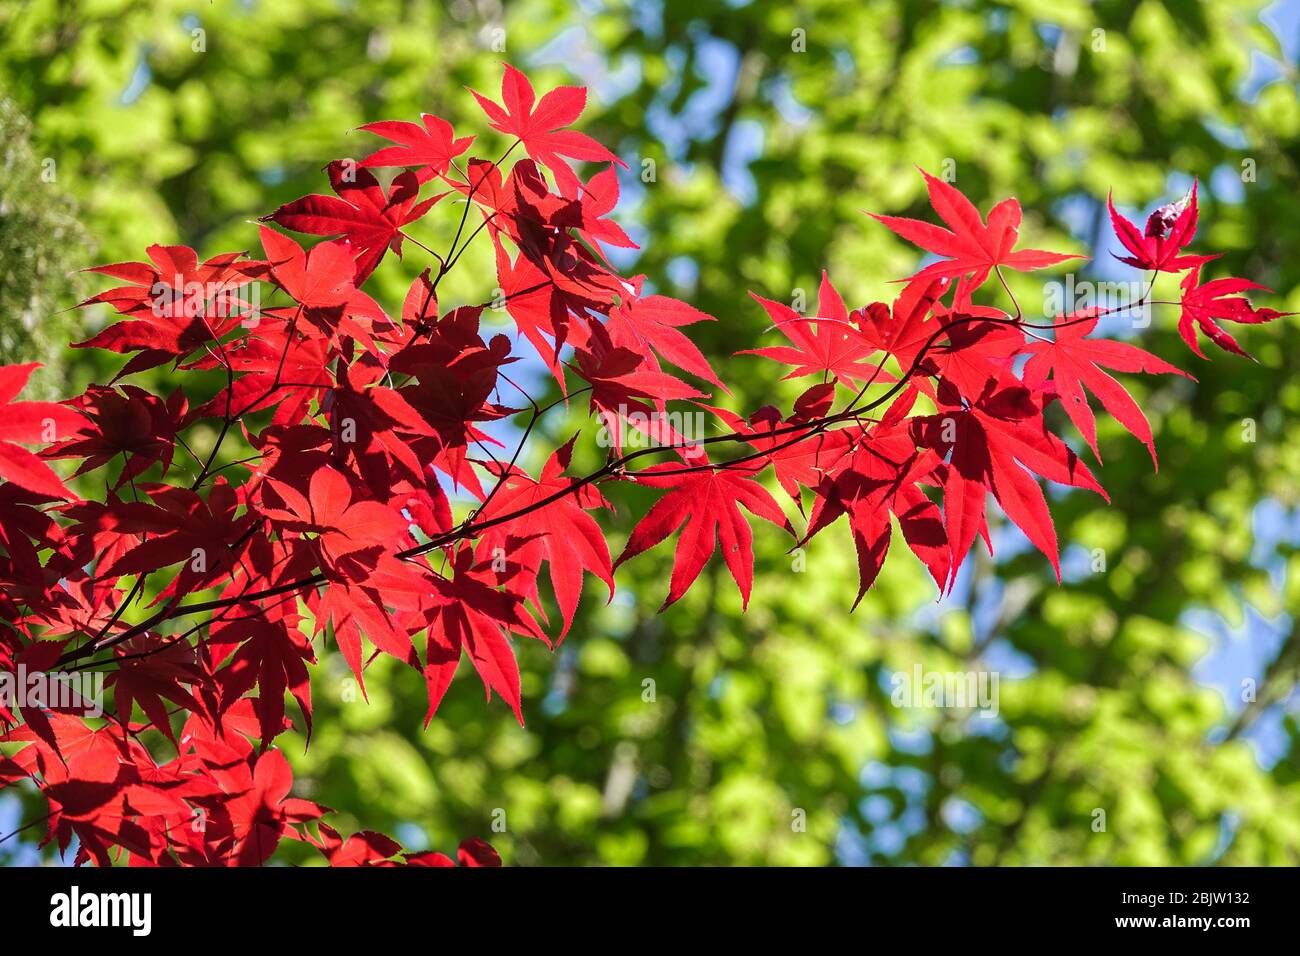 Japanese Maple Acer palmatum 'Bloodgood' Maple Red Green Foliage Tree Acer 'Bloodgood' Leaves Spring April Red leaves on Branches Stock Photo